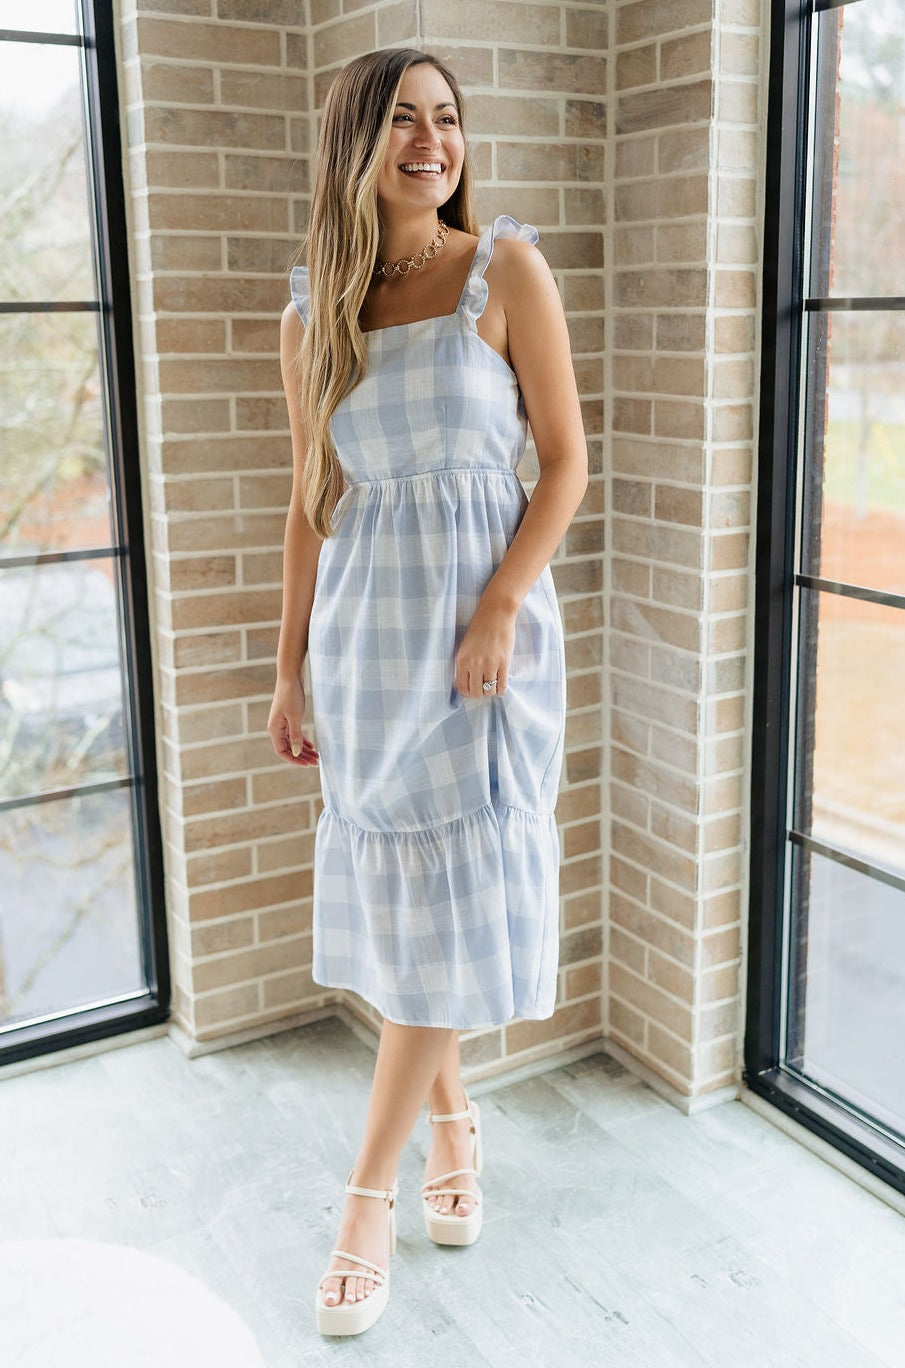 Full body view of female model wearing the Bonnie Light Blue and White Plaid Midi Dress which features Light Blue and White Plaid Design Midi Length, White Lining, Tiered Ruffle Hem, Square Neckline with Ruffle Straps and Sleeveless.